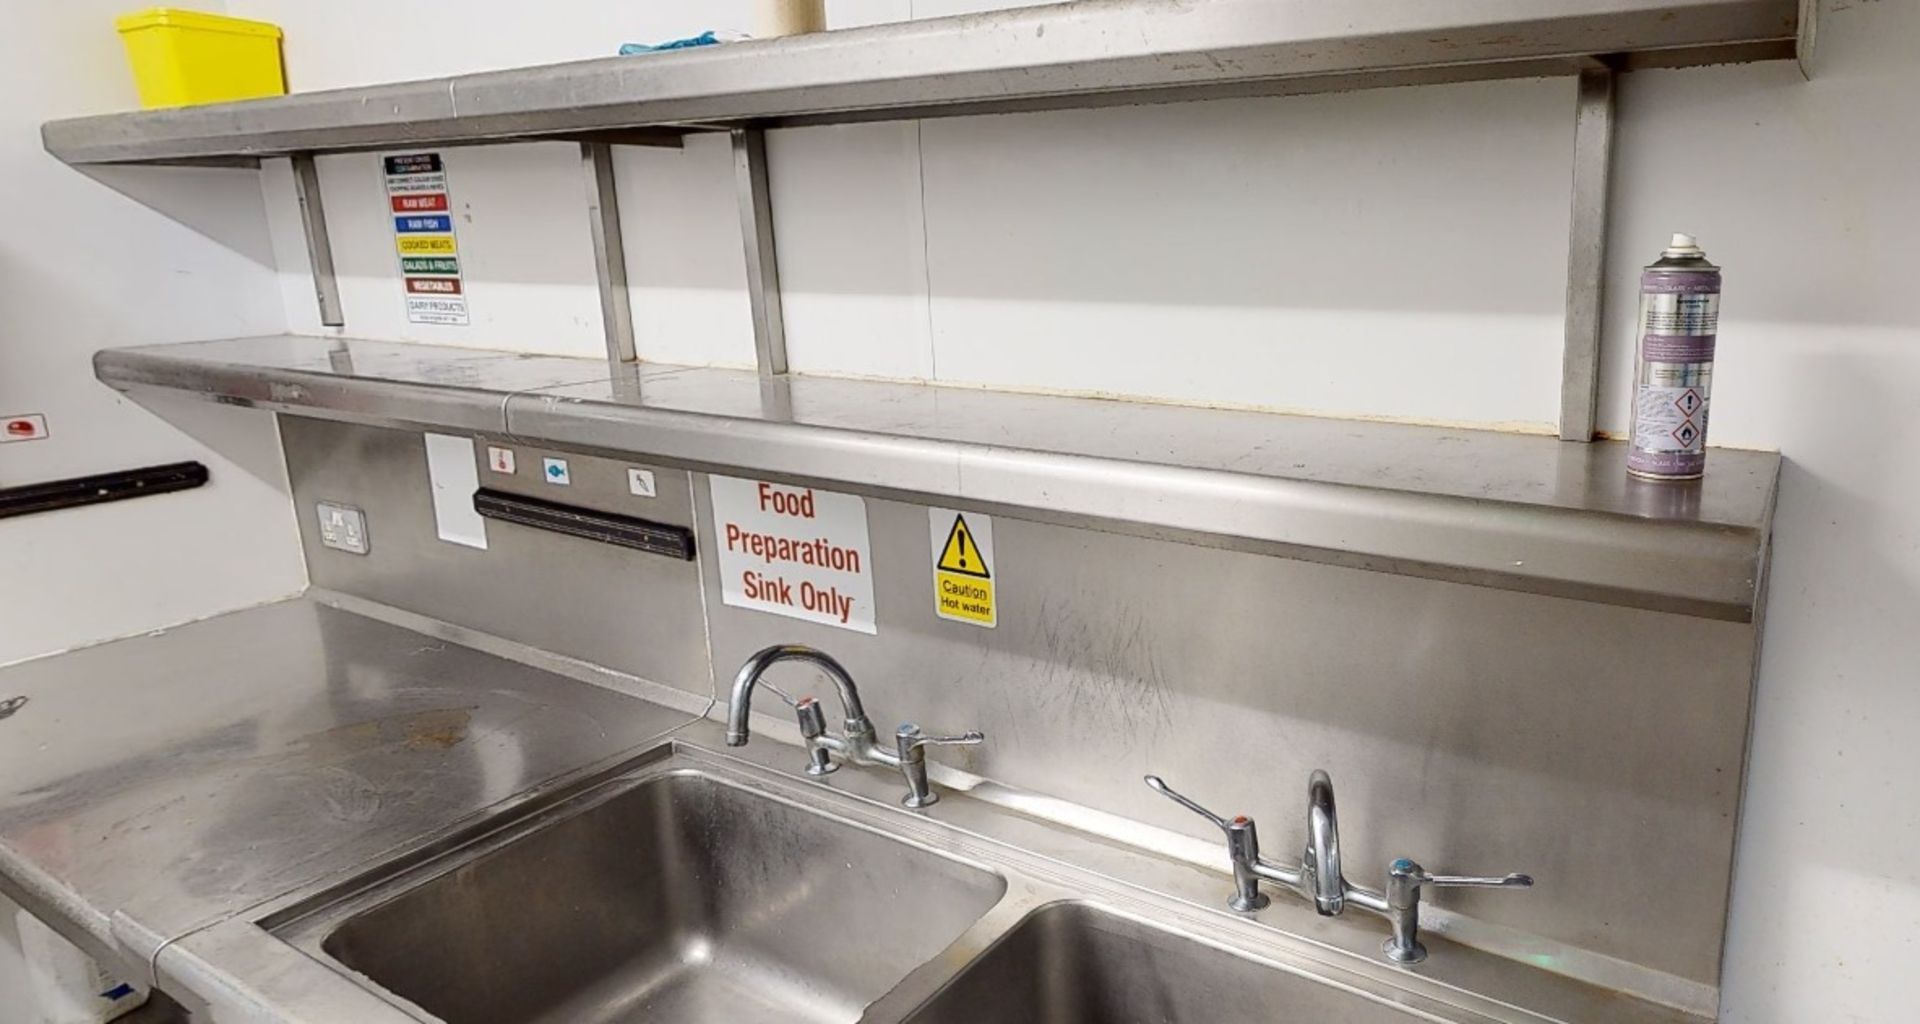 1 x Stainless Steel Commercial Wash Stand With Twin Sink Basins, Mixer Taps, Overhead Shelves, - Image 10 of 10